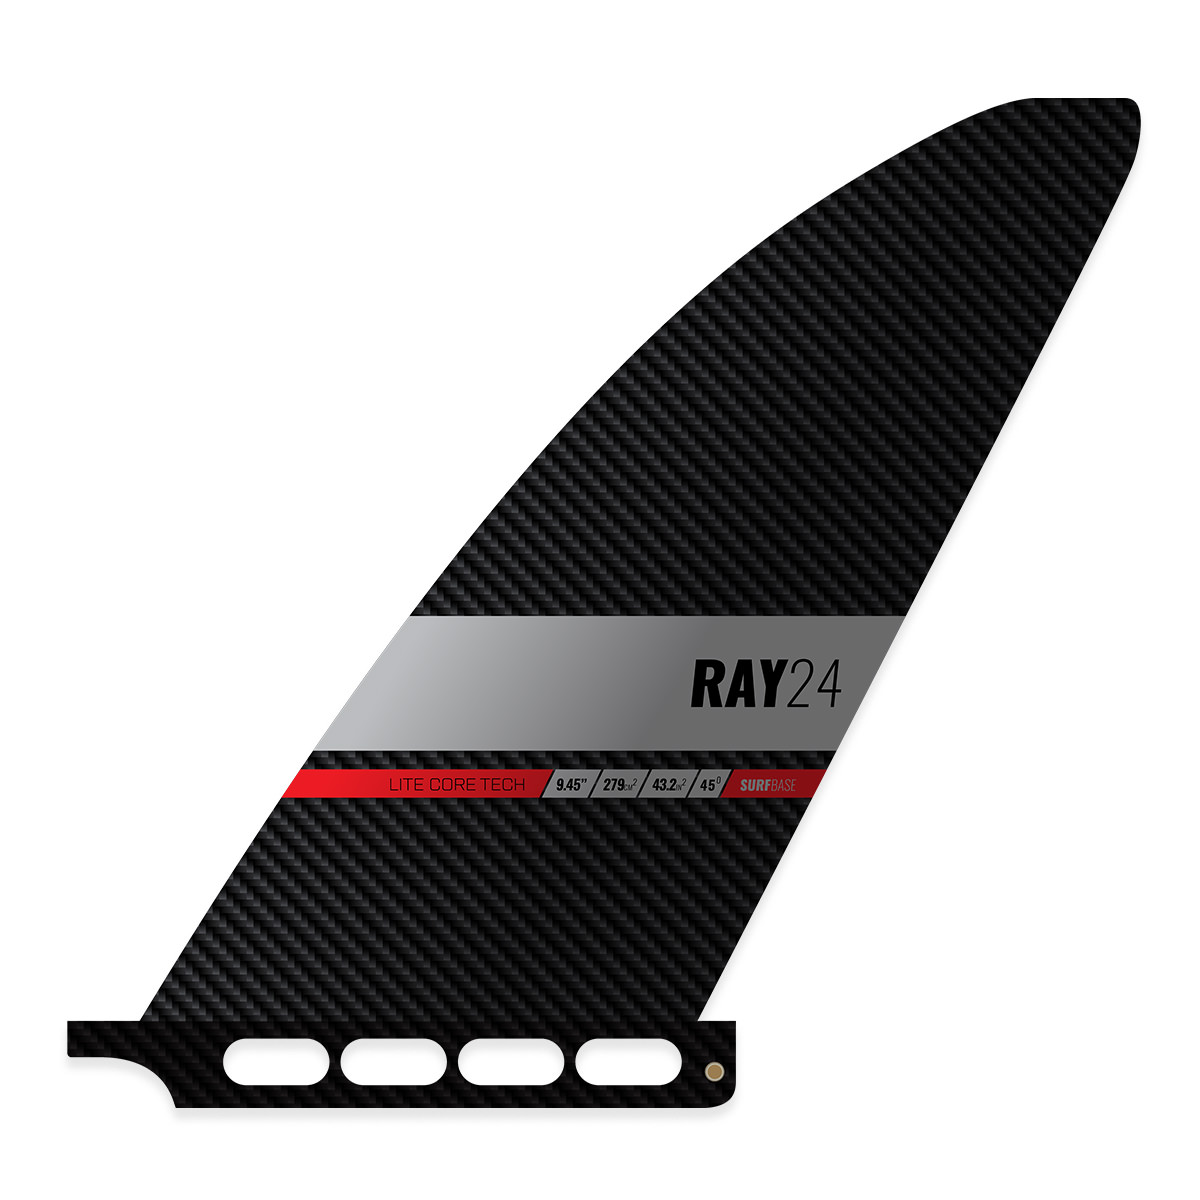 Ray fin, ray suo fin, ray v2 sup, paddle board fin, stability, tracking, gilde, speed, black project, standup paddle fin, choppy water, carbon sup fin